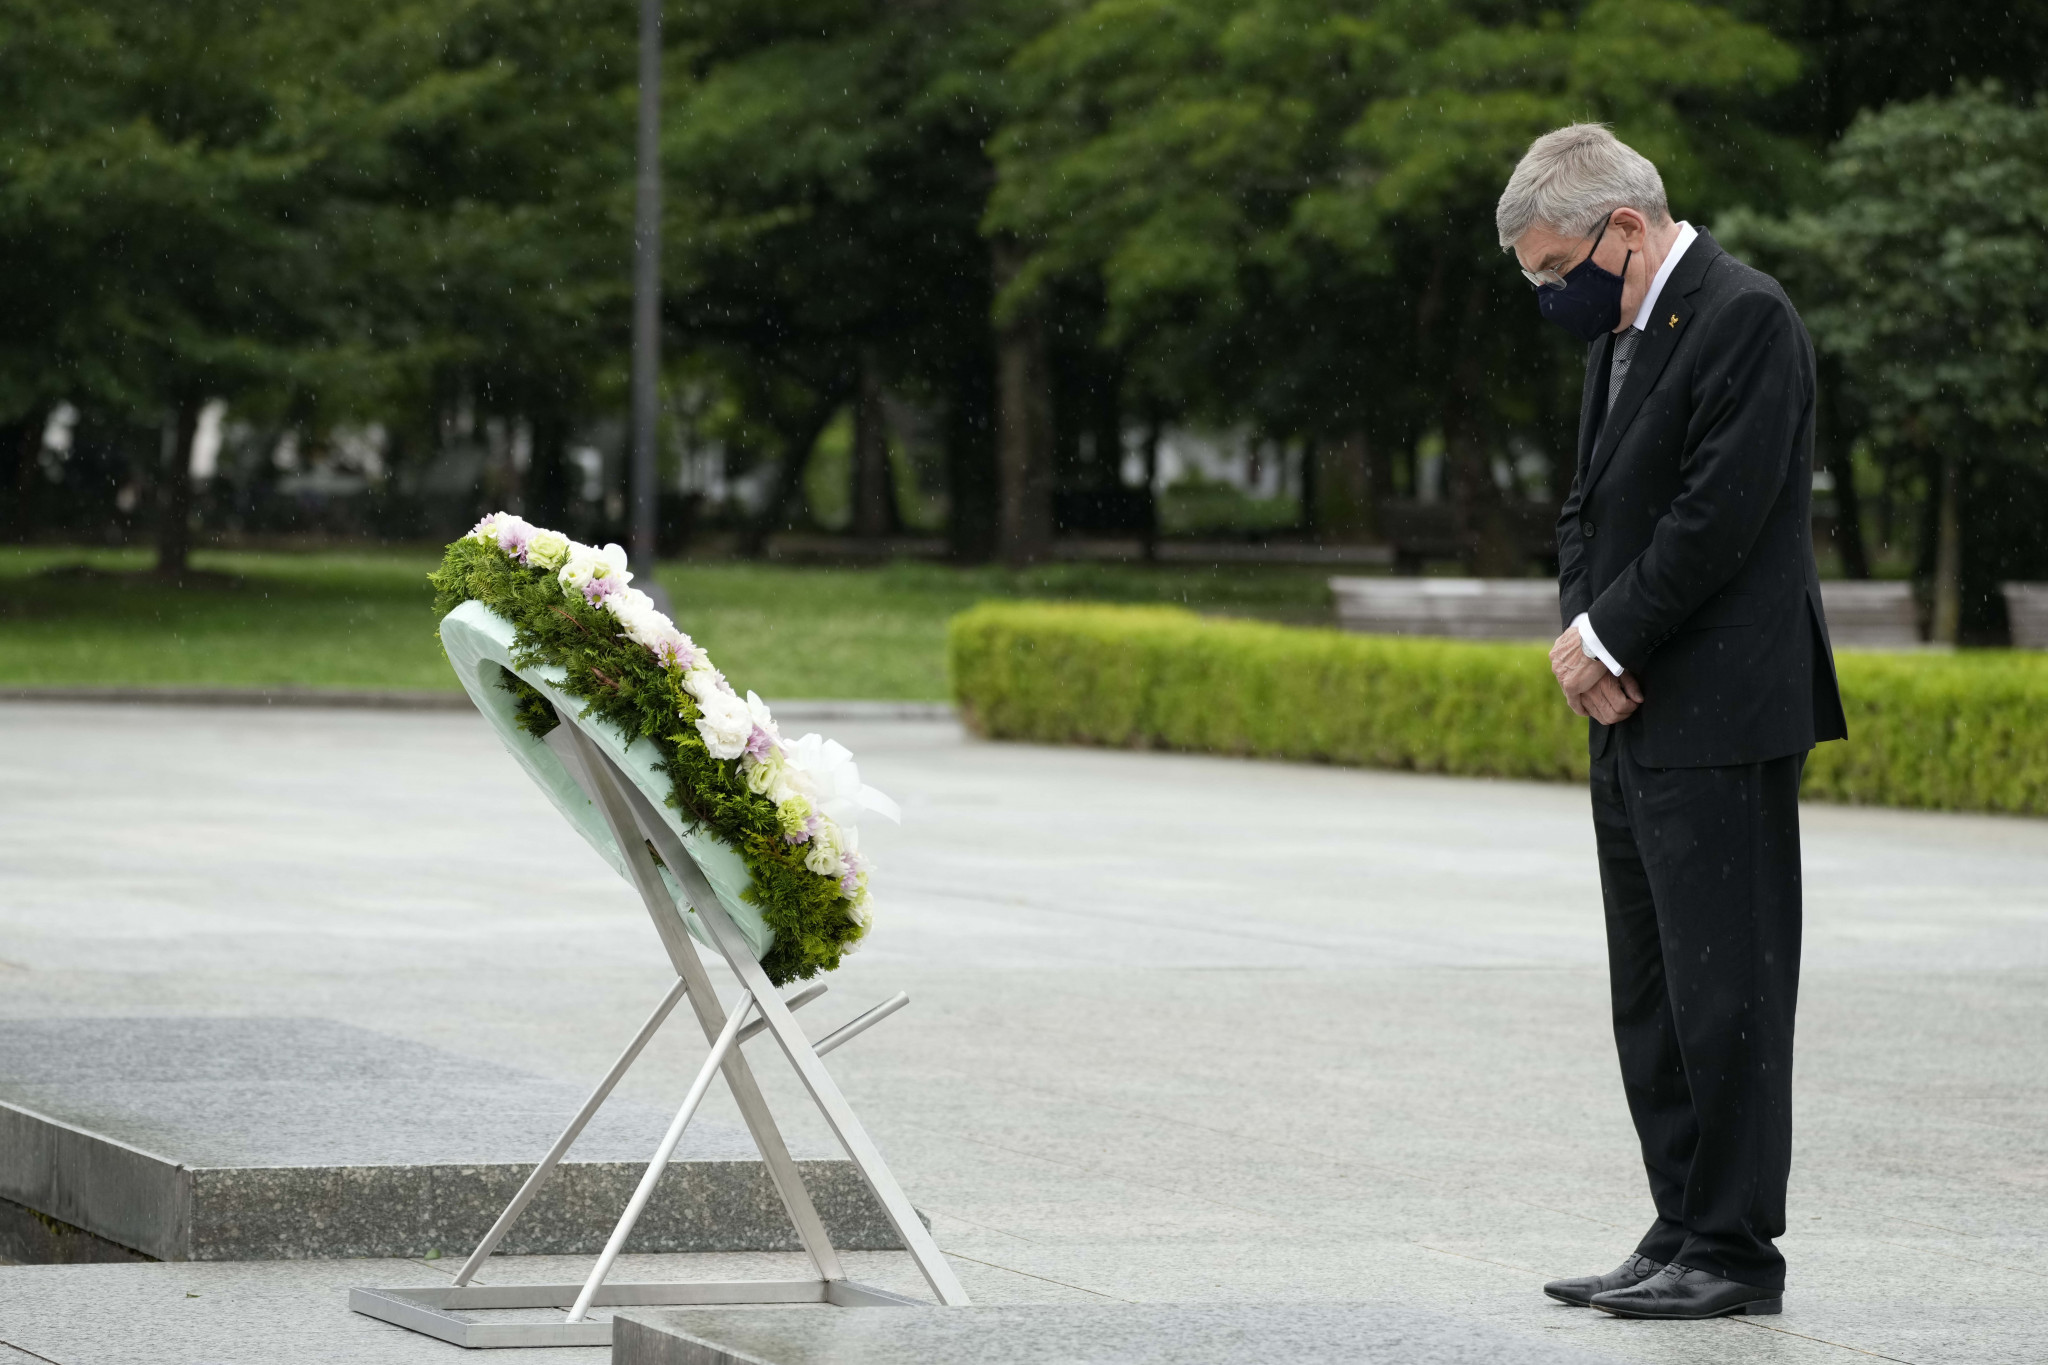 IOC President Thomas Bach paid a visit to Hiroshima but Tokyo 2020 will not commemorate the victims on the 76th anniversary of the atomic bomb ©Getty Images